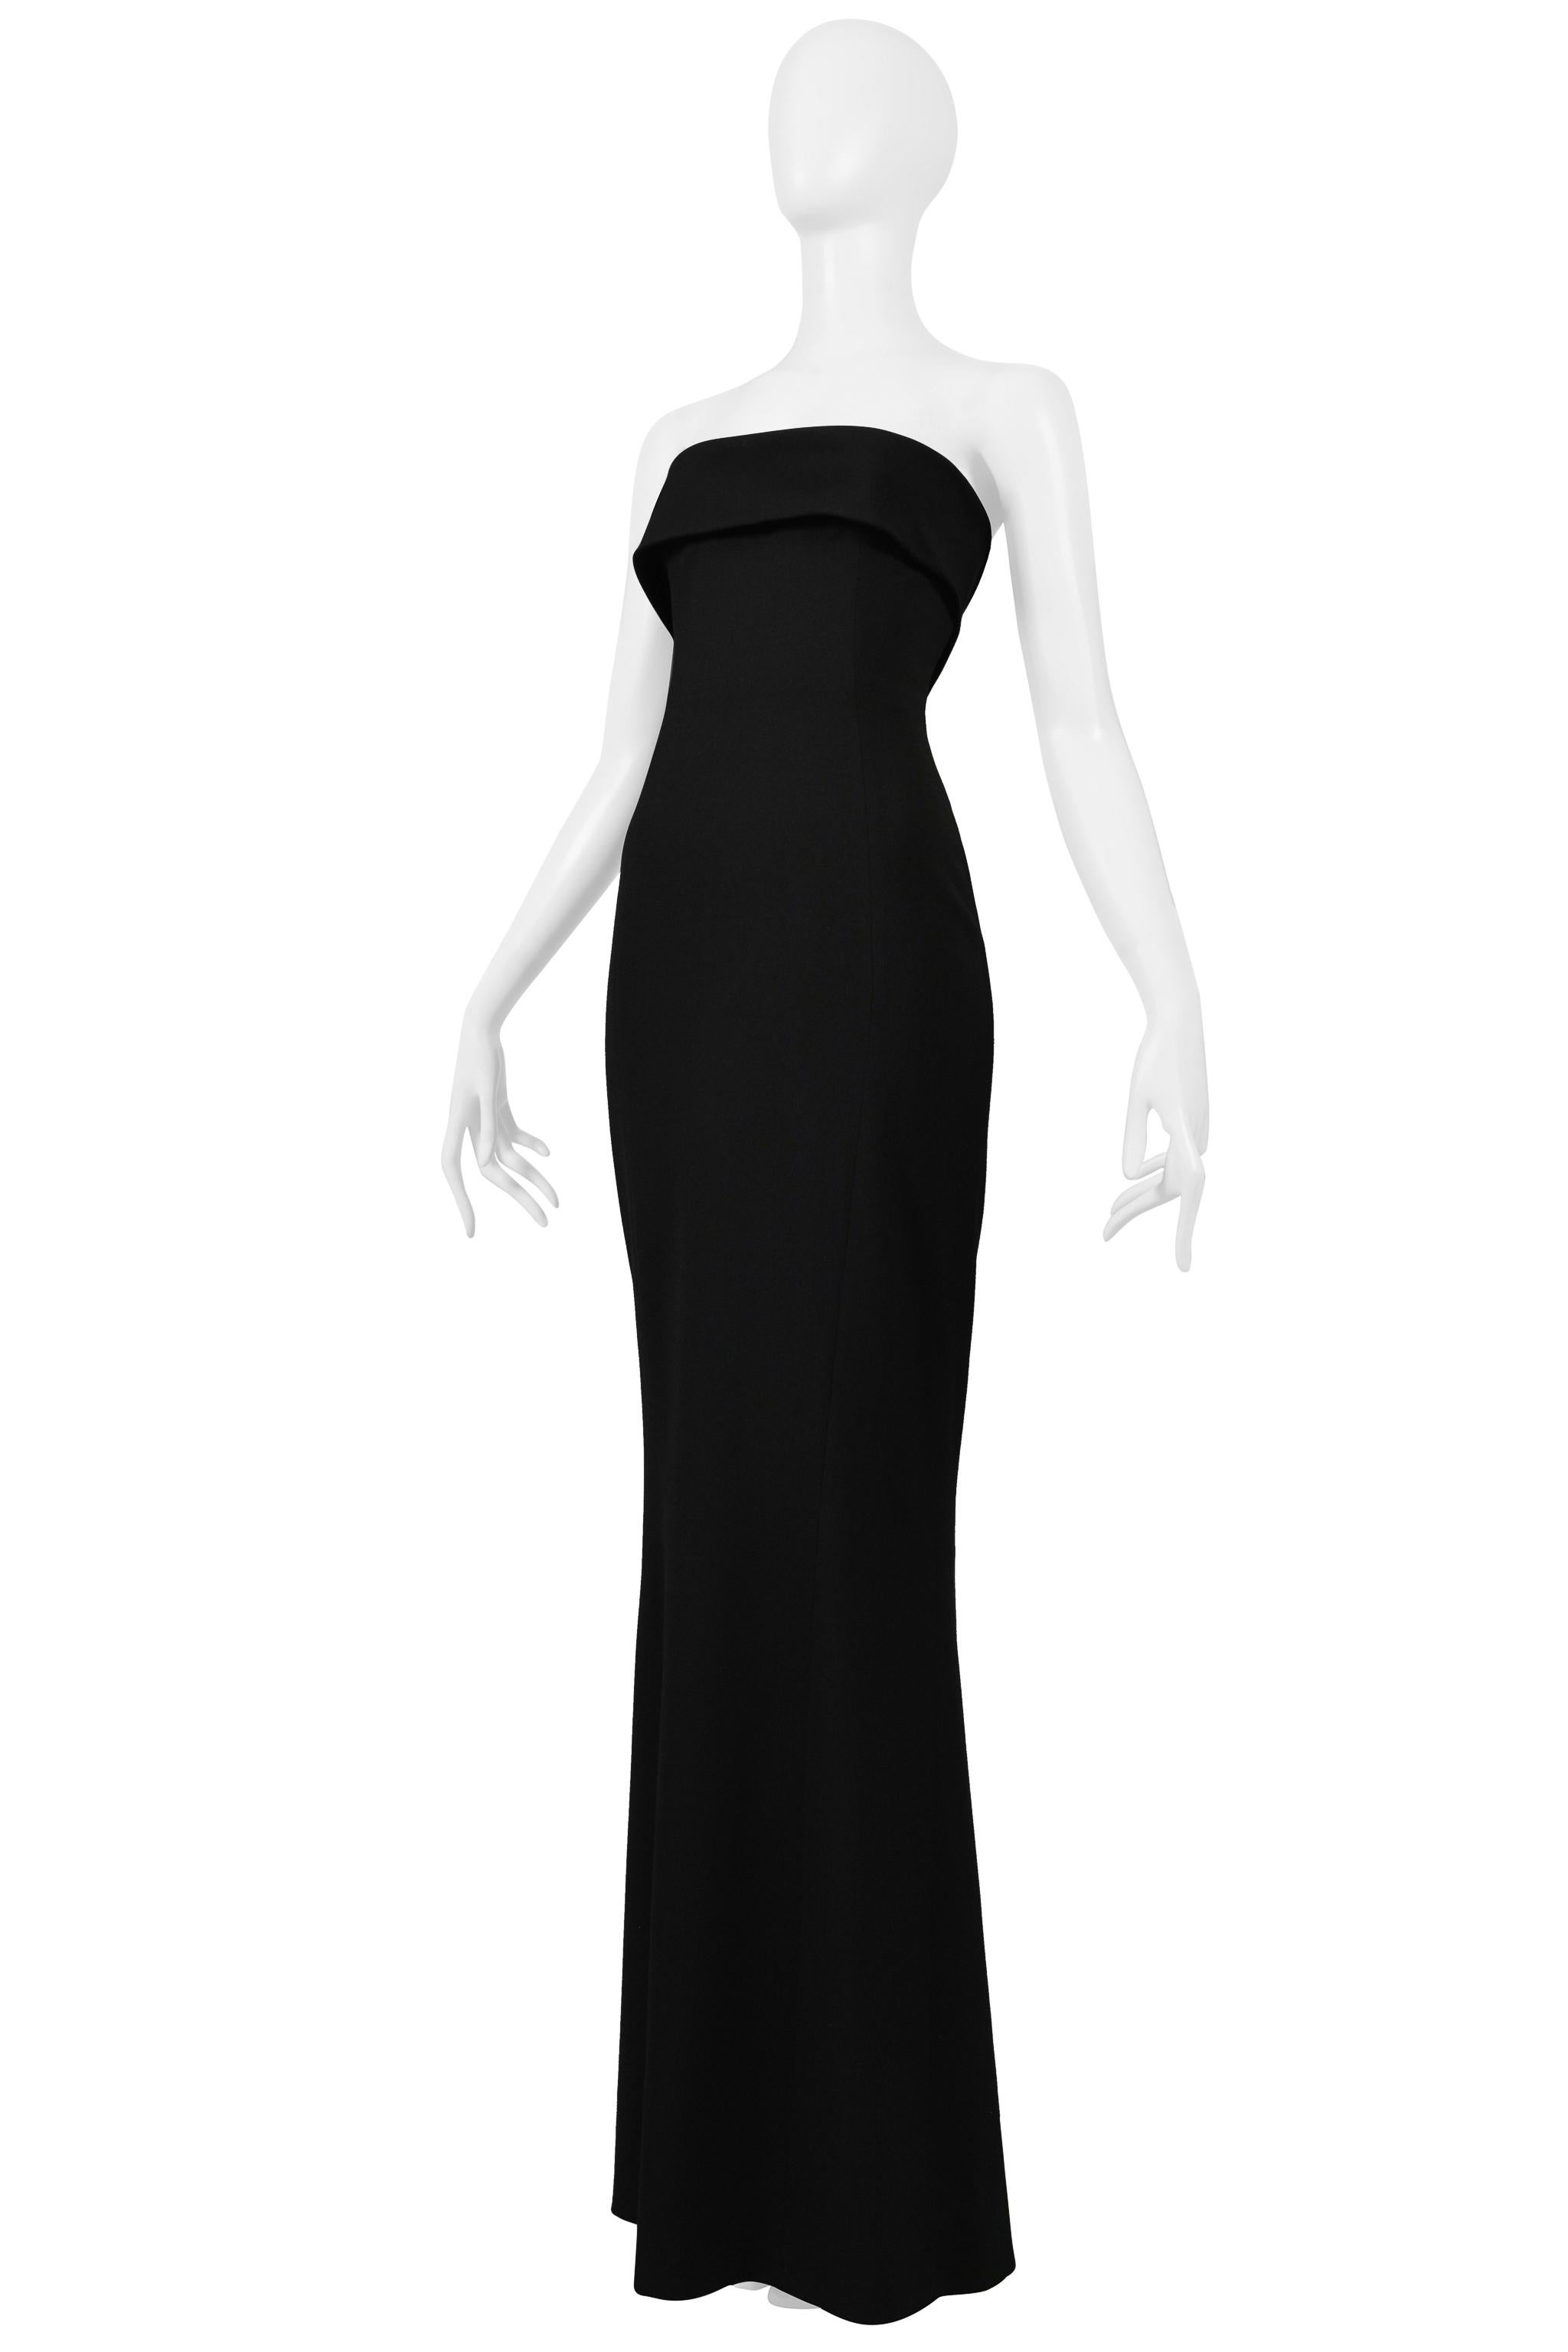 Dsquared Black Strapless Evening Gown With Bow 2014 In Excellent Condition For Sale In Los Angeles, CA